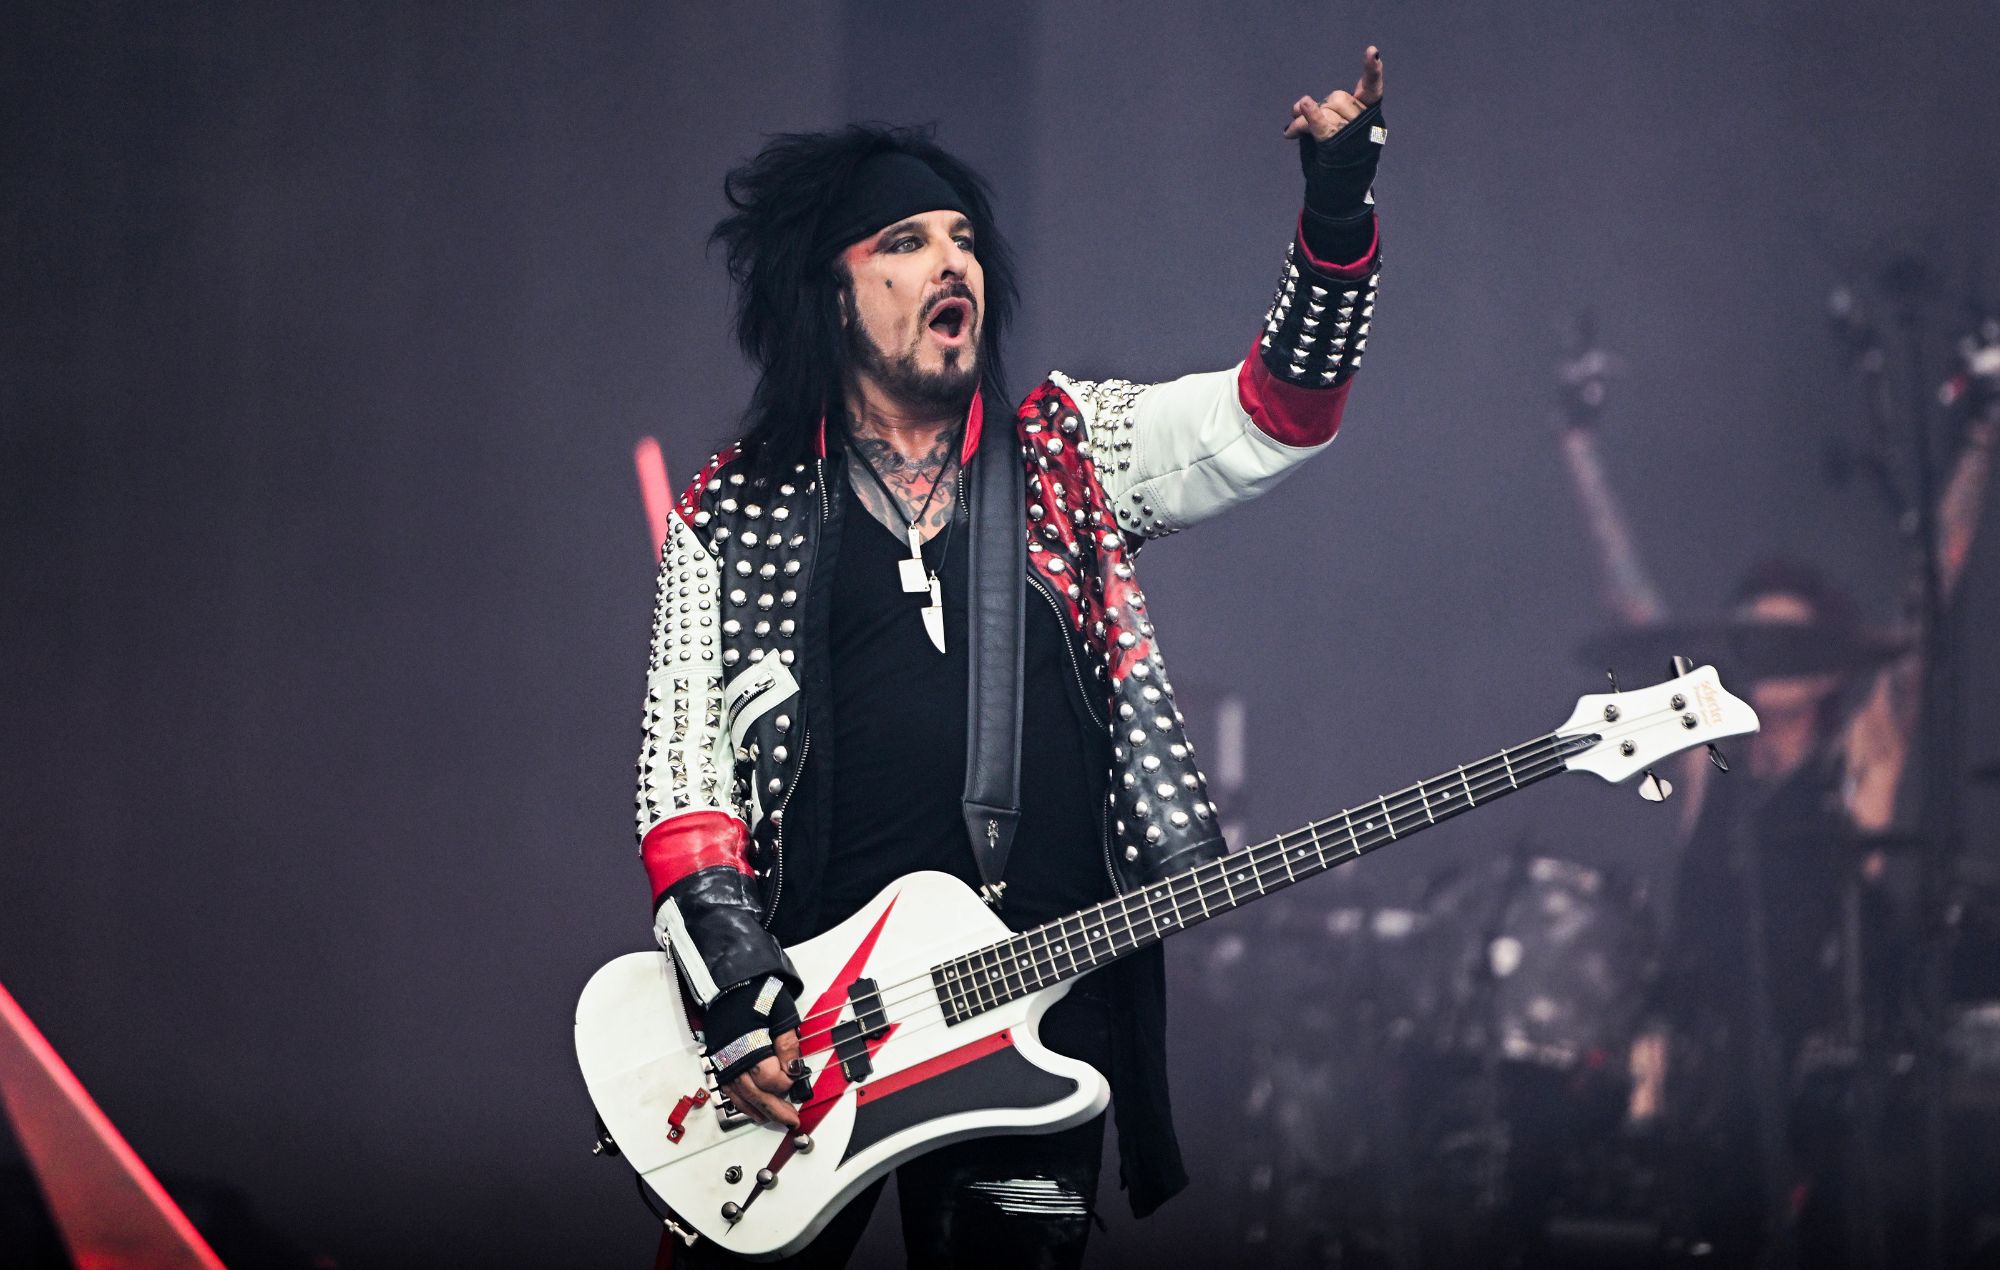 Nikki Sixx of Mötley Crüe performs live for the 